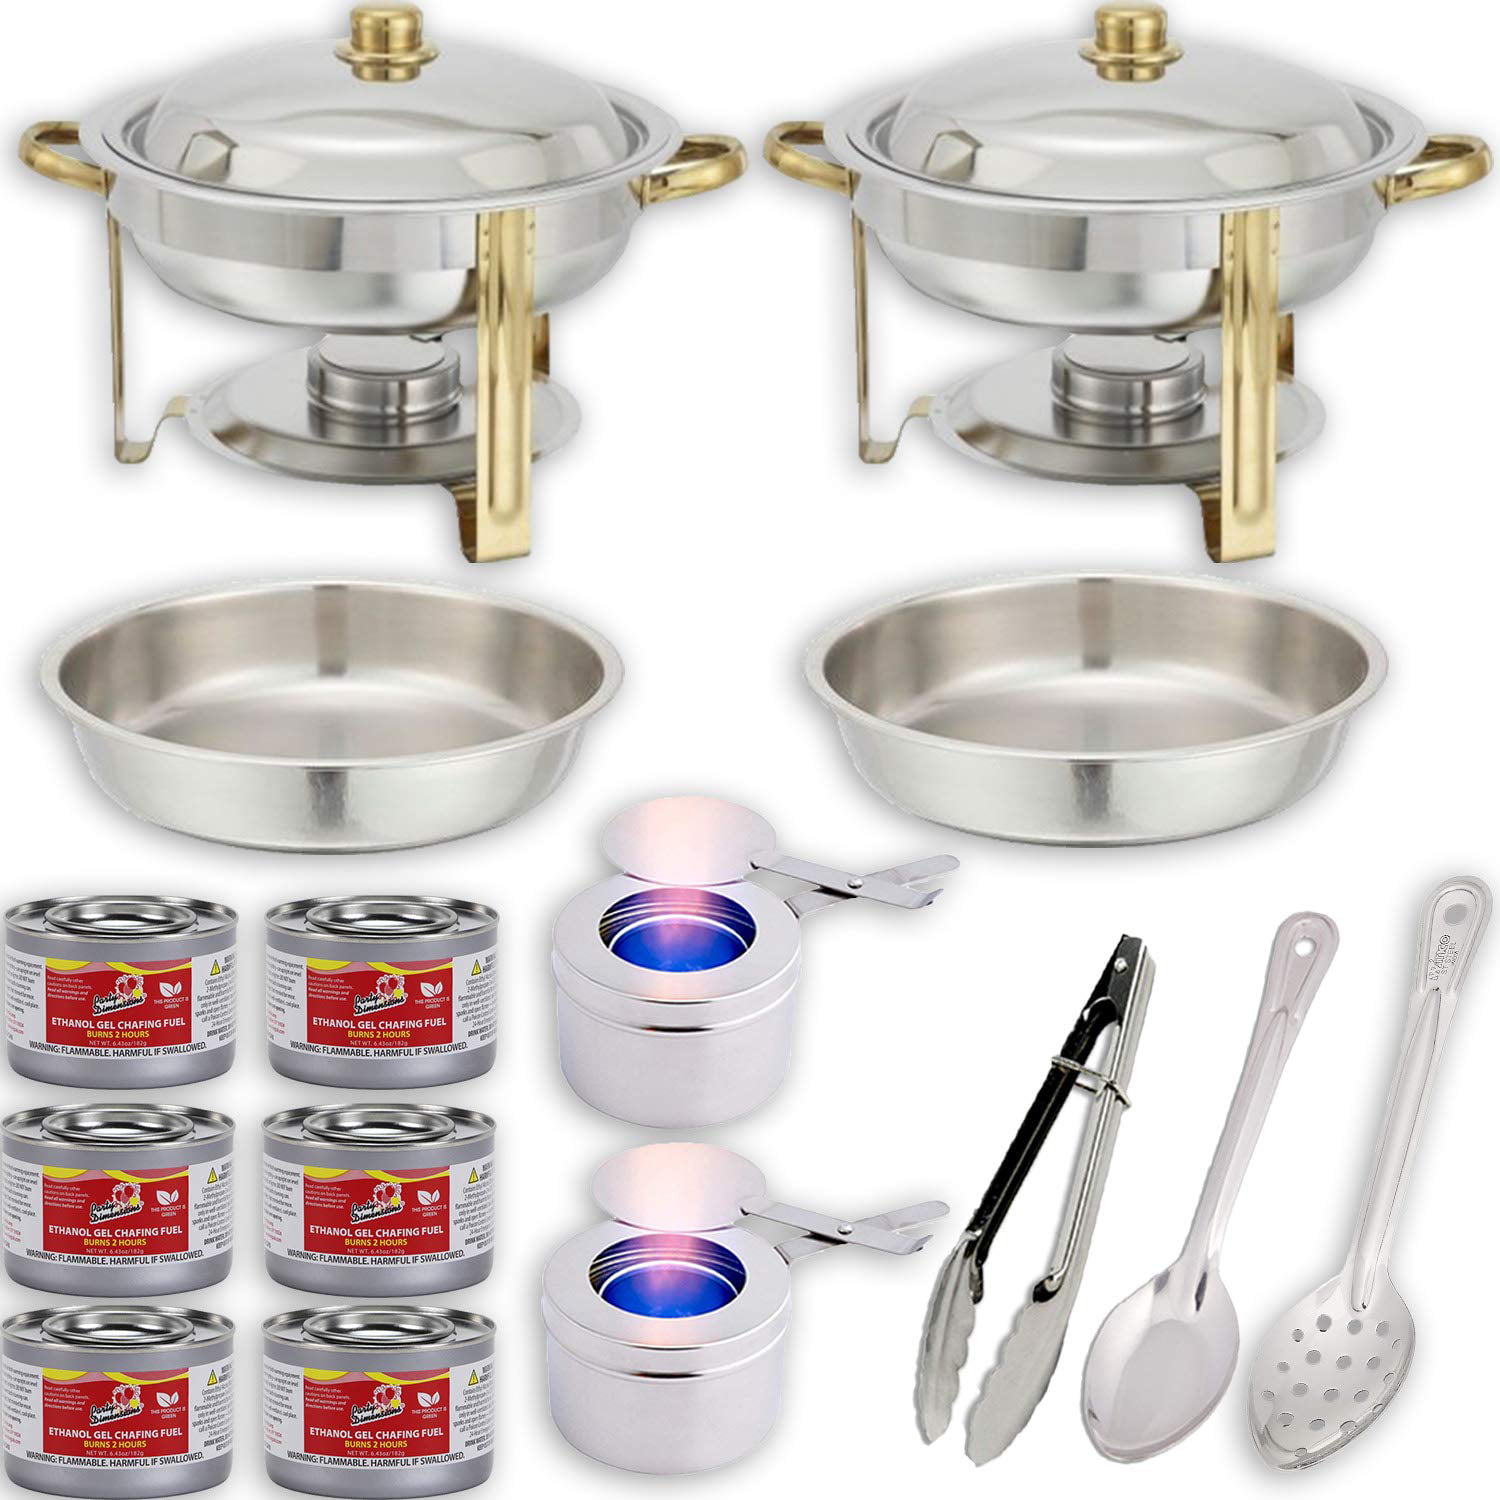 Water Pan Divided pan Chafing Dish Buffet Set w/Fuel — Folding Frame Fuel Holders 8 qt + Full Pan 11” Solid & Perforated Spoon + 9” Tongs 4qt x 2 Warmer kit 6 Fuel Cans Serving Utensils 